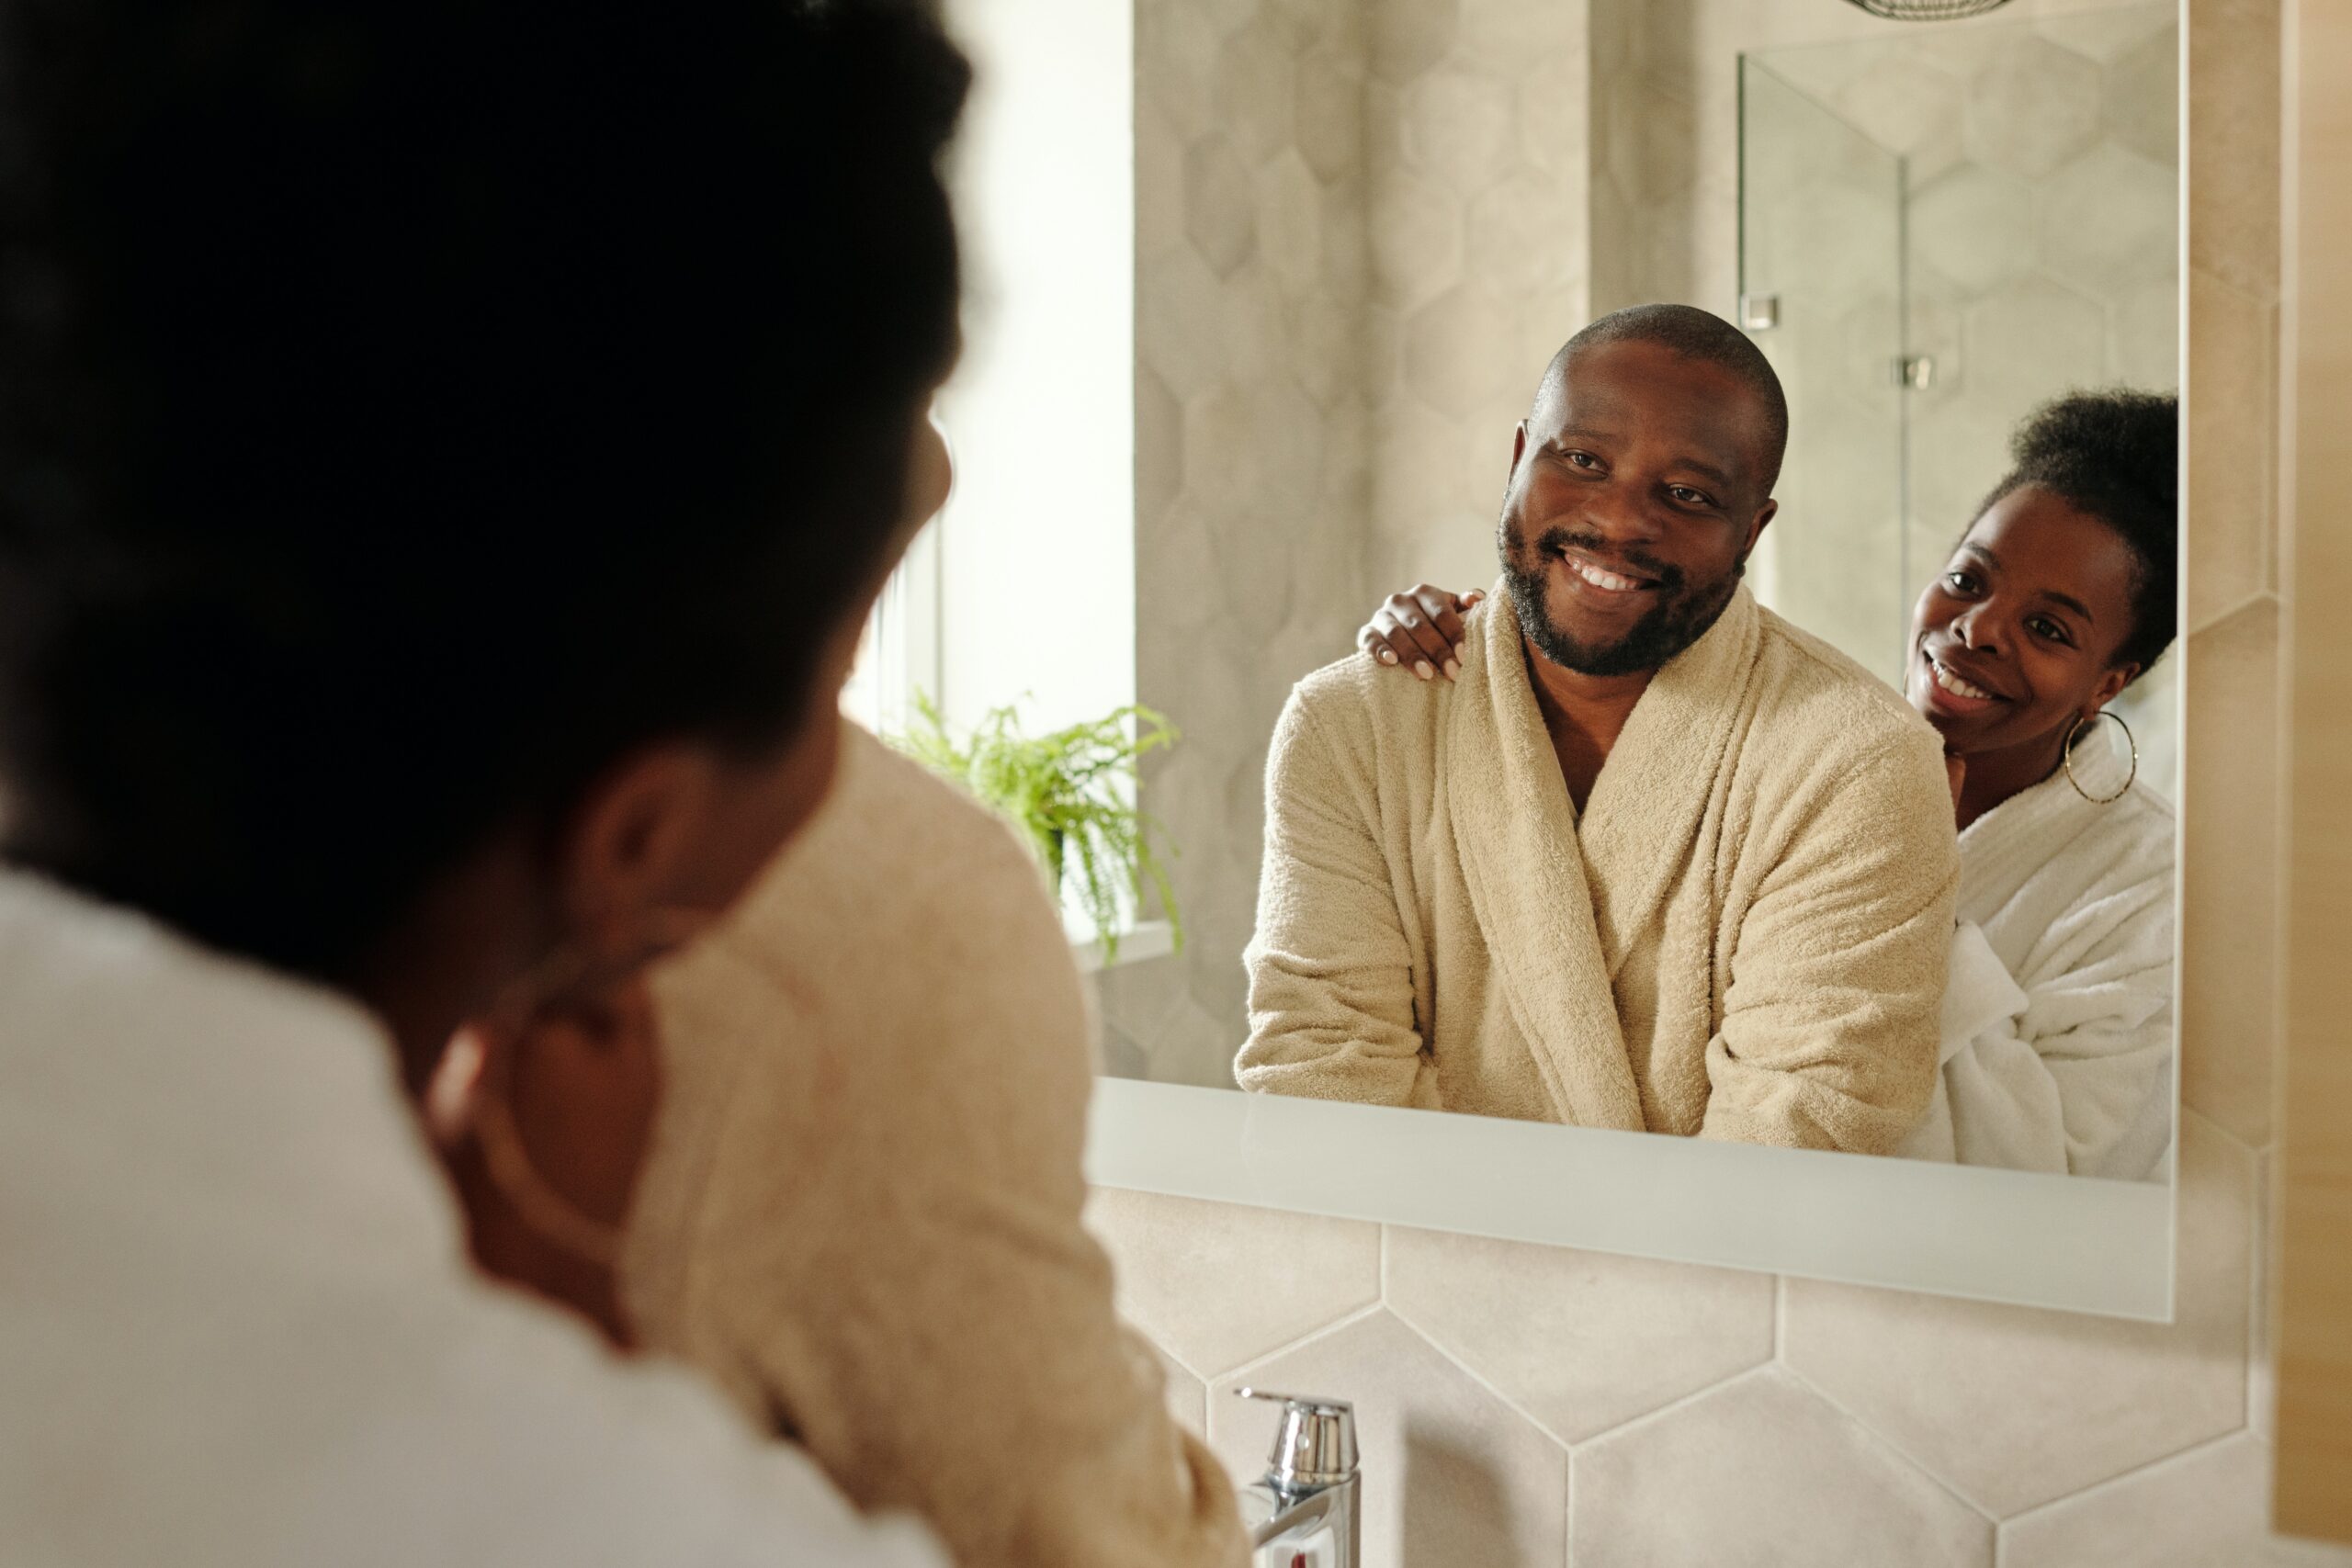 A man and woman smiling at each other in the mirror